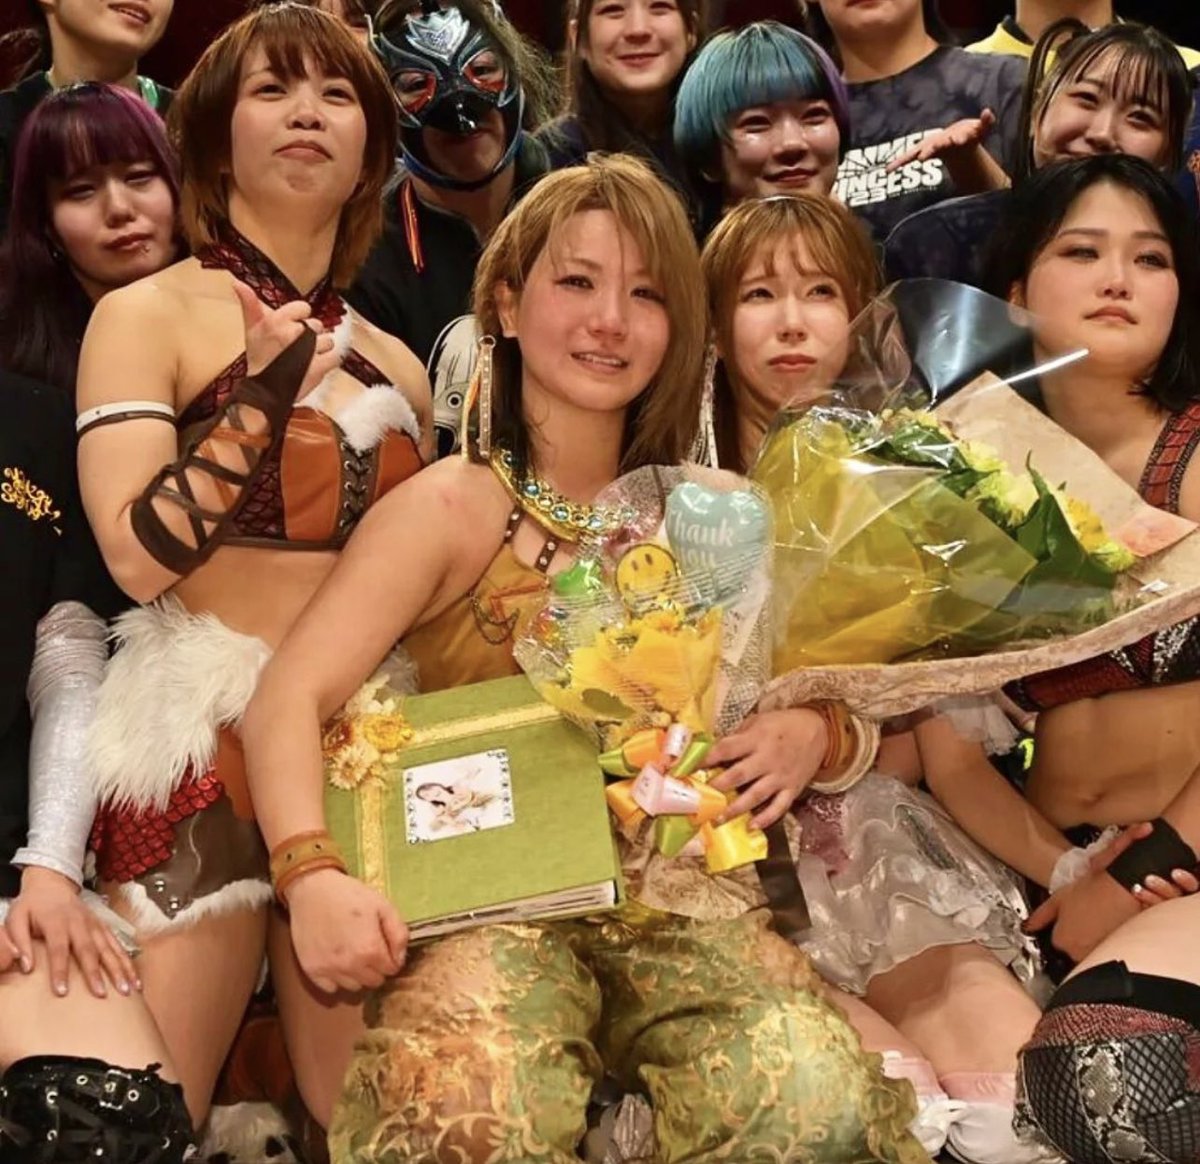 A bitter sweet moment to see the end of @YukaSakazaki journey in TJPW. Such an incredible performer who consistently showed heart in every match. We’re excited to see what the future holds for Yuka here in the US! AYAYAYA forever 🤍